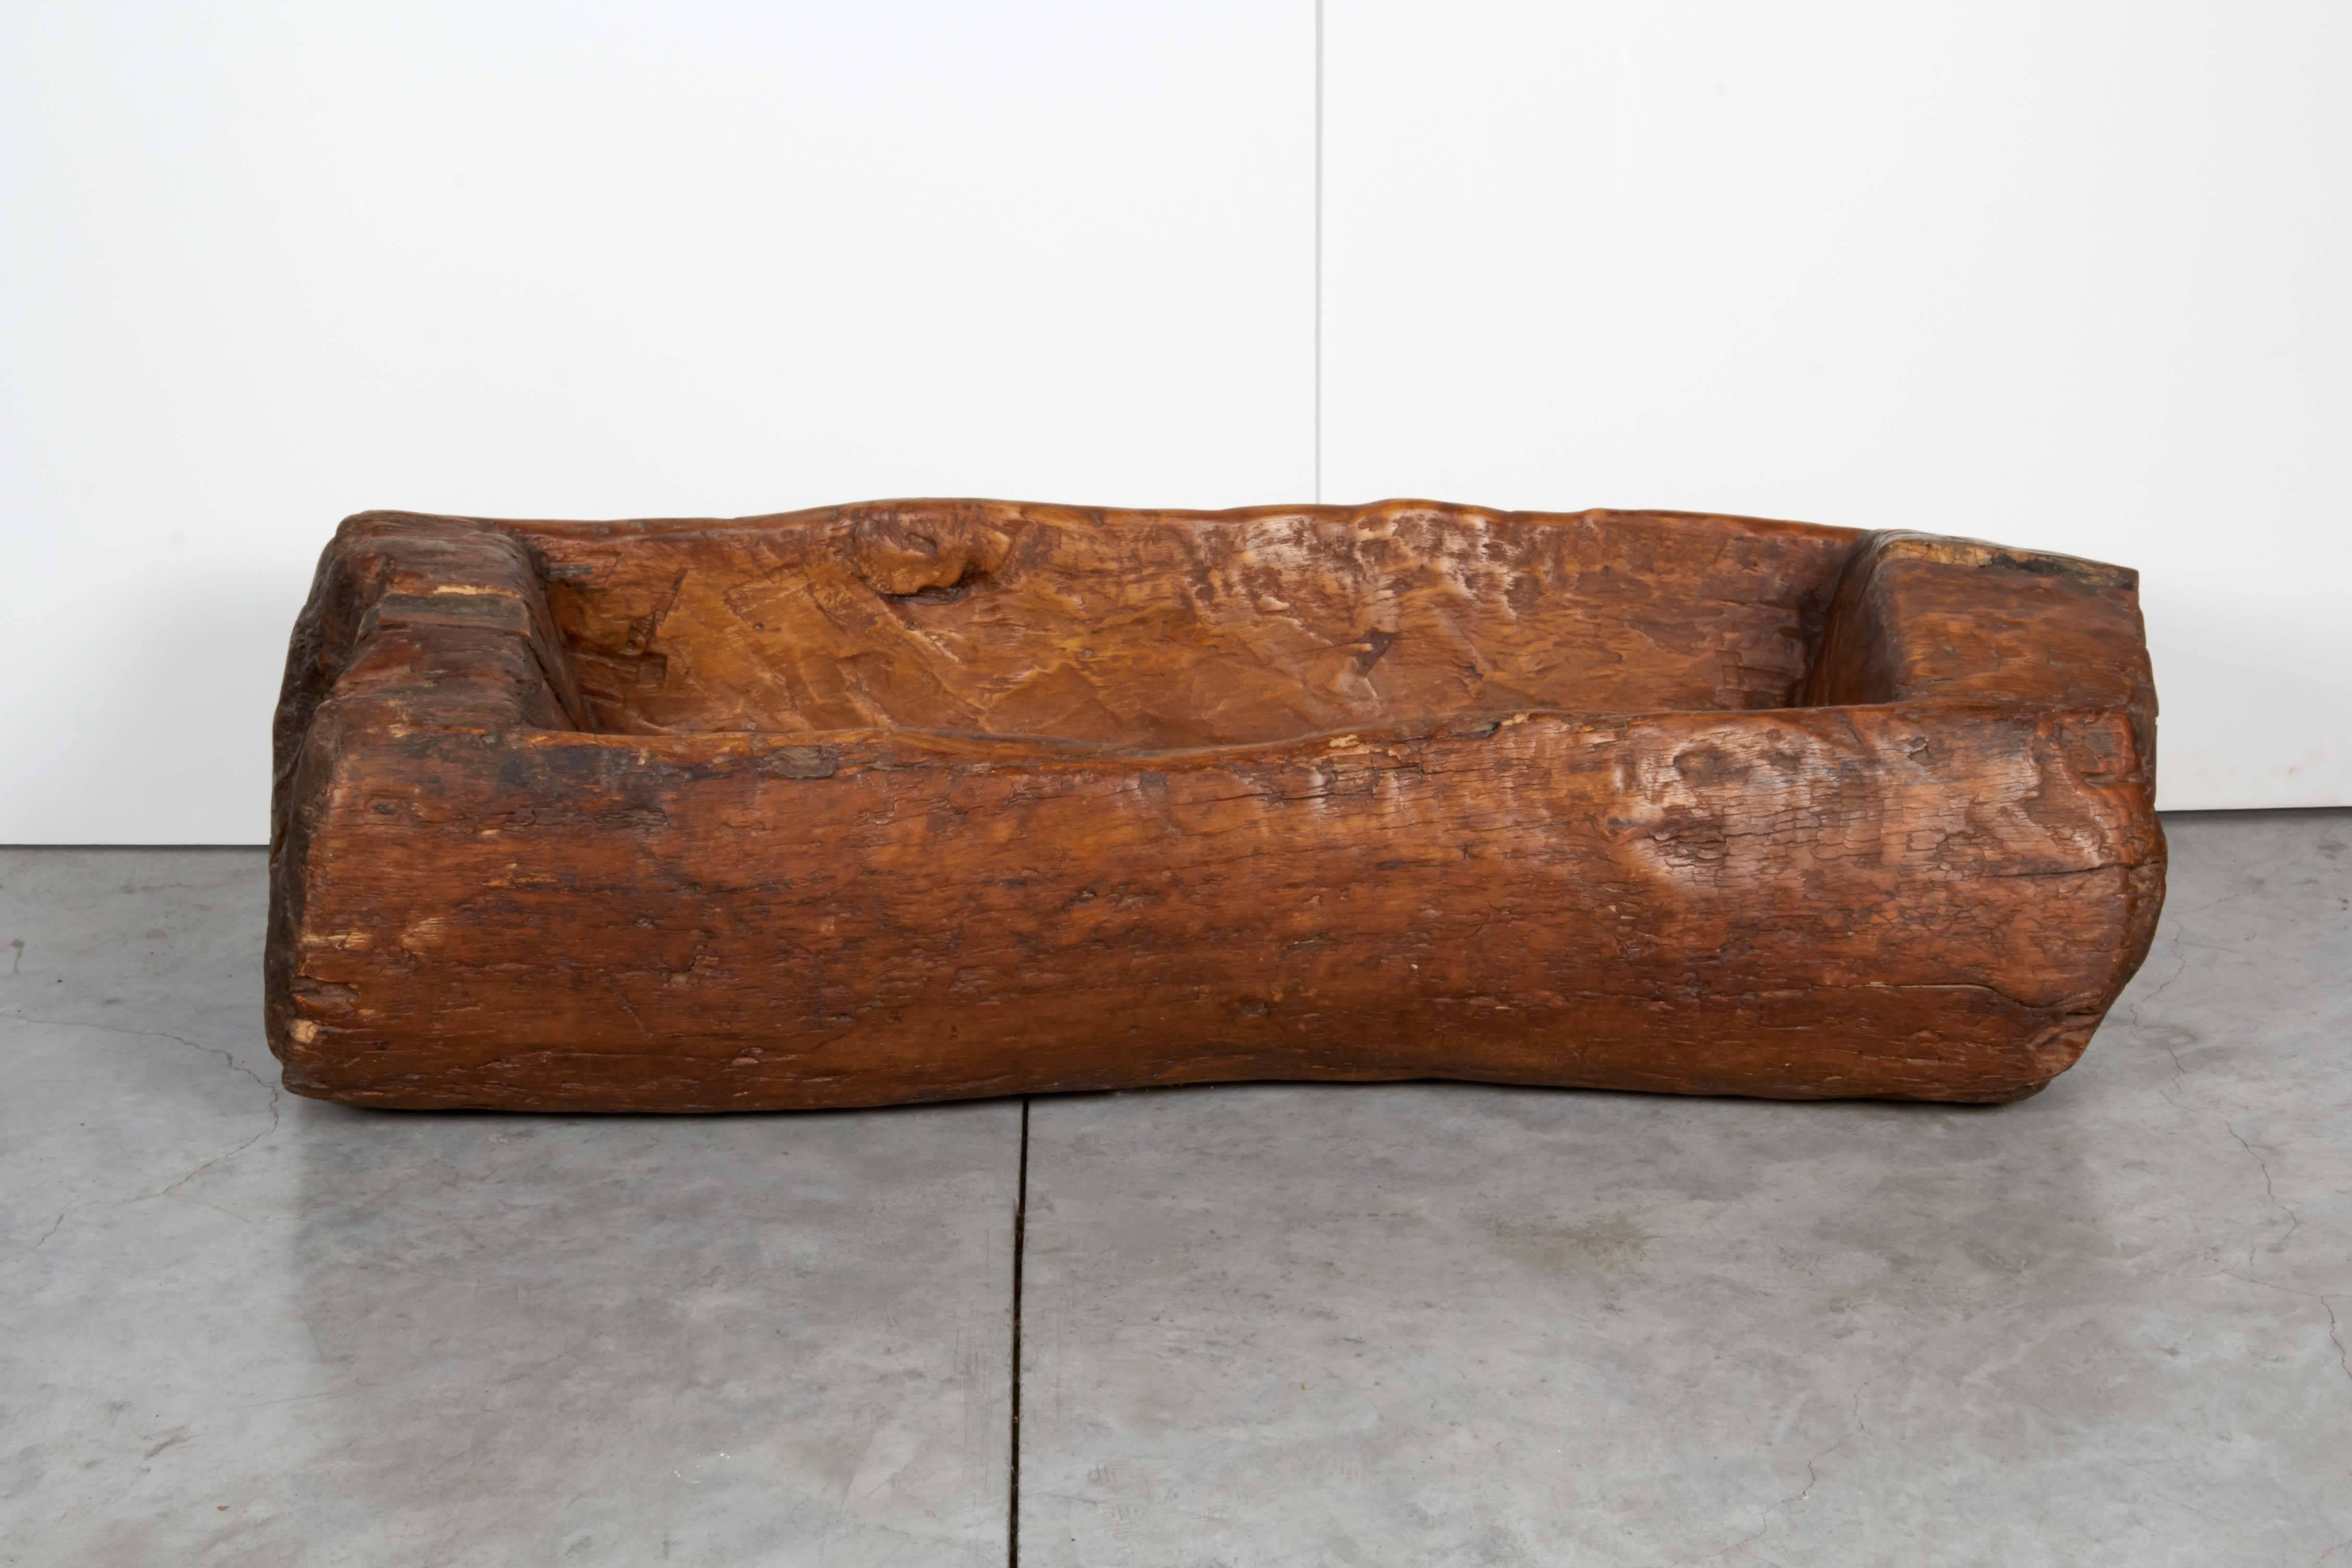 A very thick, sturdy antique horse trough from Shanxi Province, China. Carved out of a solid piece of elmwood, circa 1900.
M580.